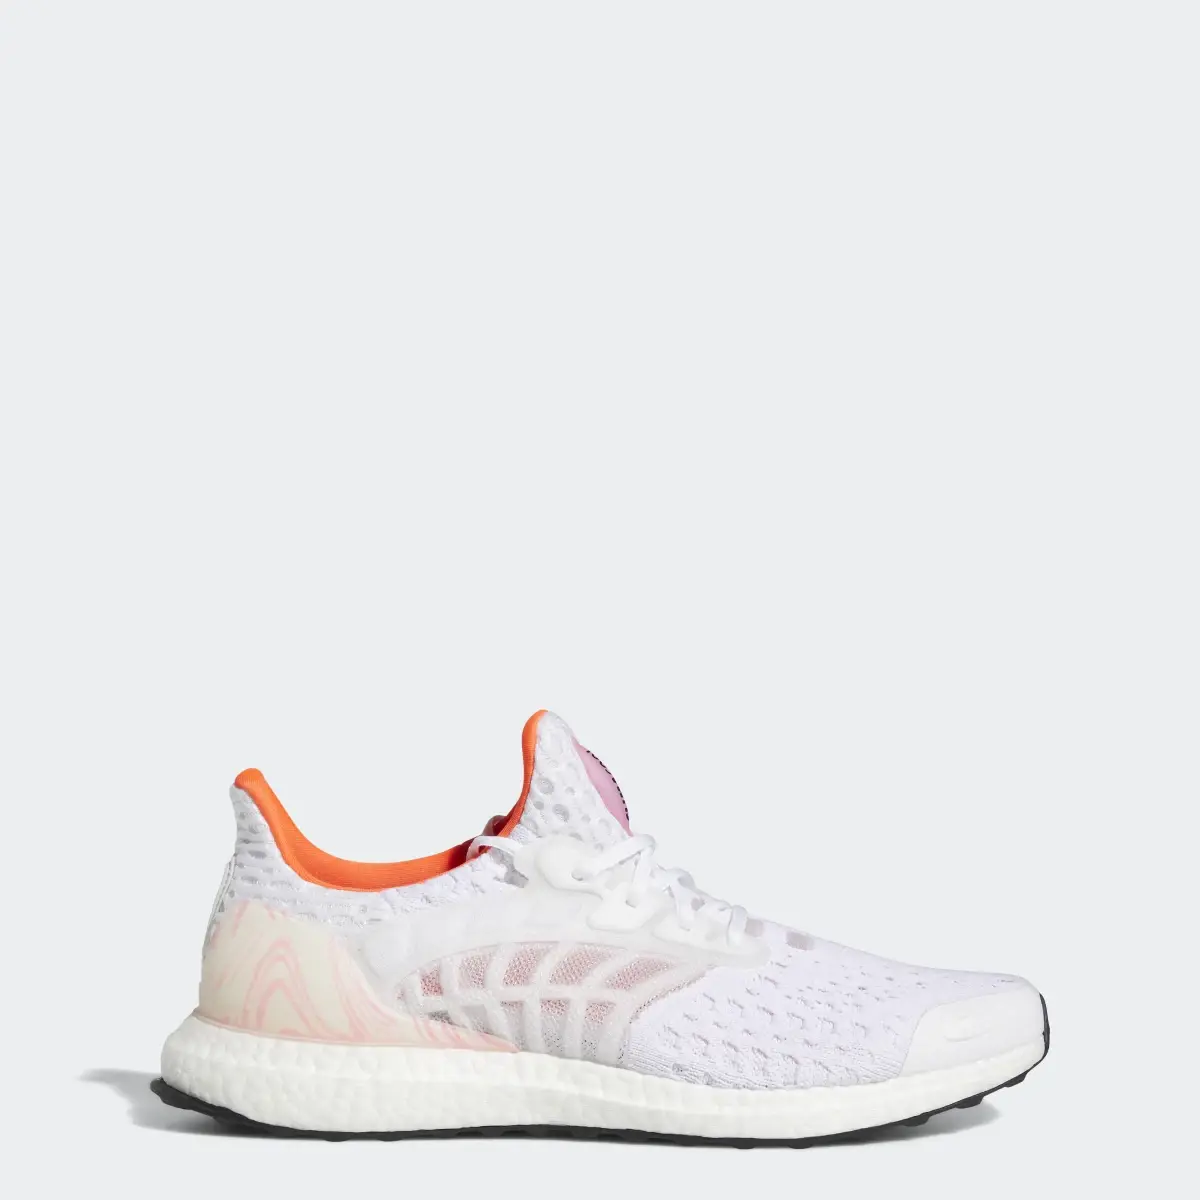 Adidas Ultraboost CC_2 DNA Climacool Running Sportswear Lifestyle Shoes. 1